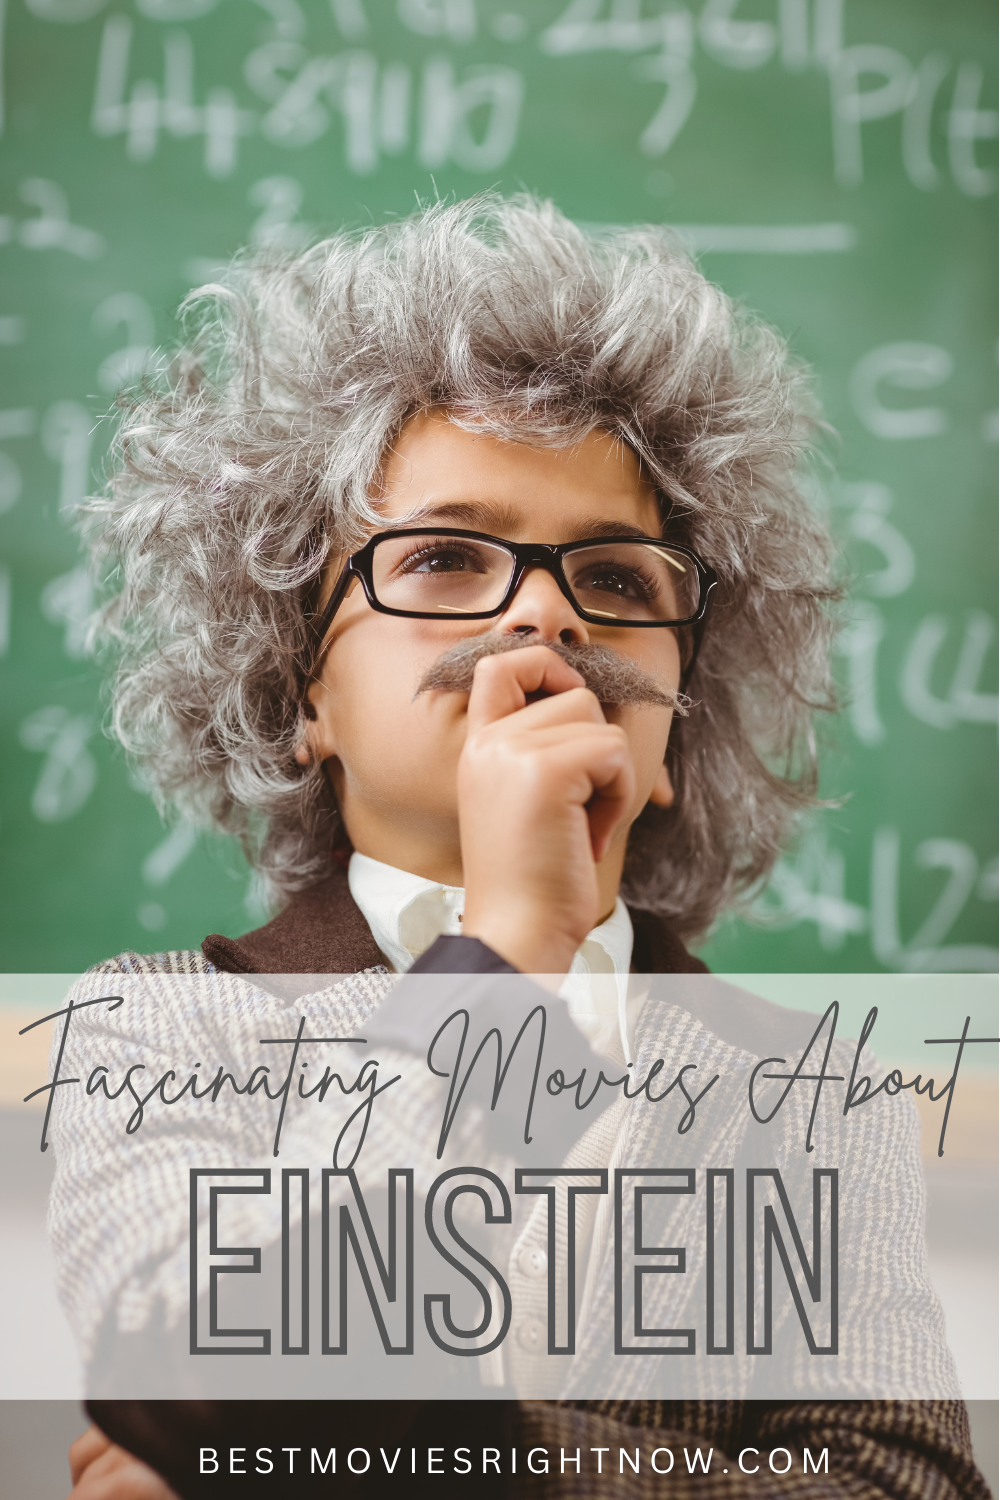 a picture of little Einstein with caption 